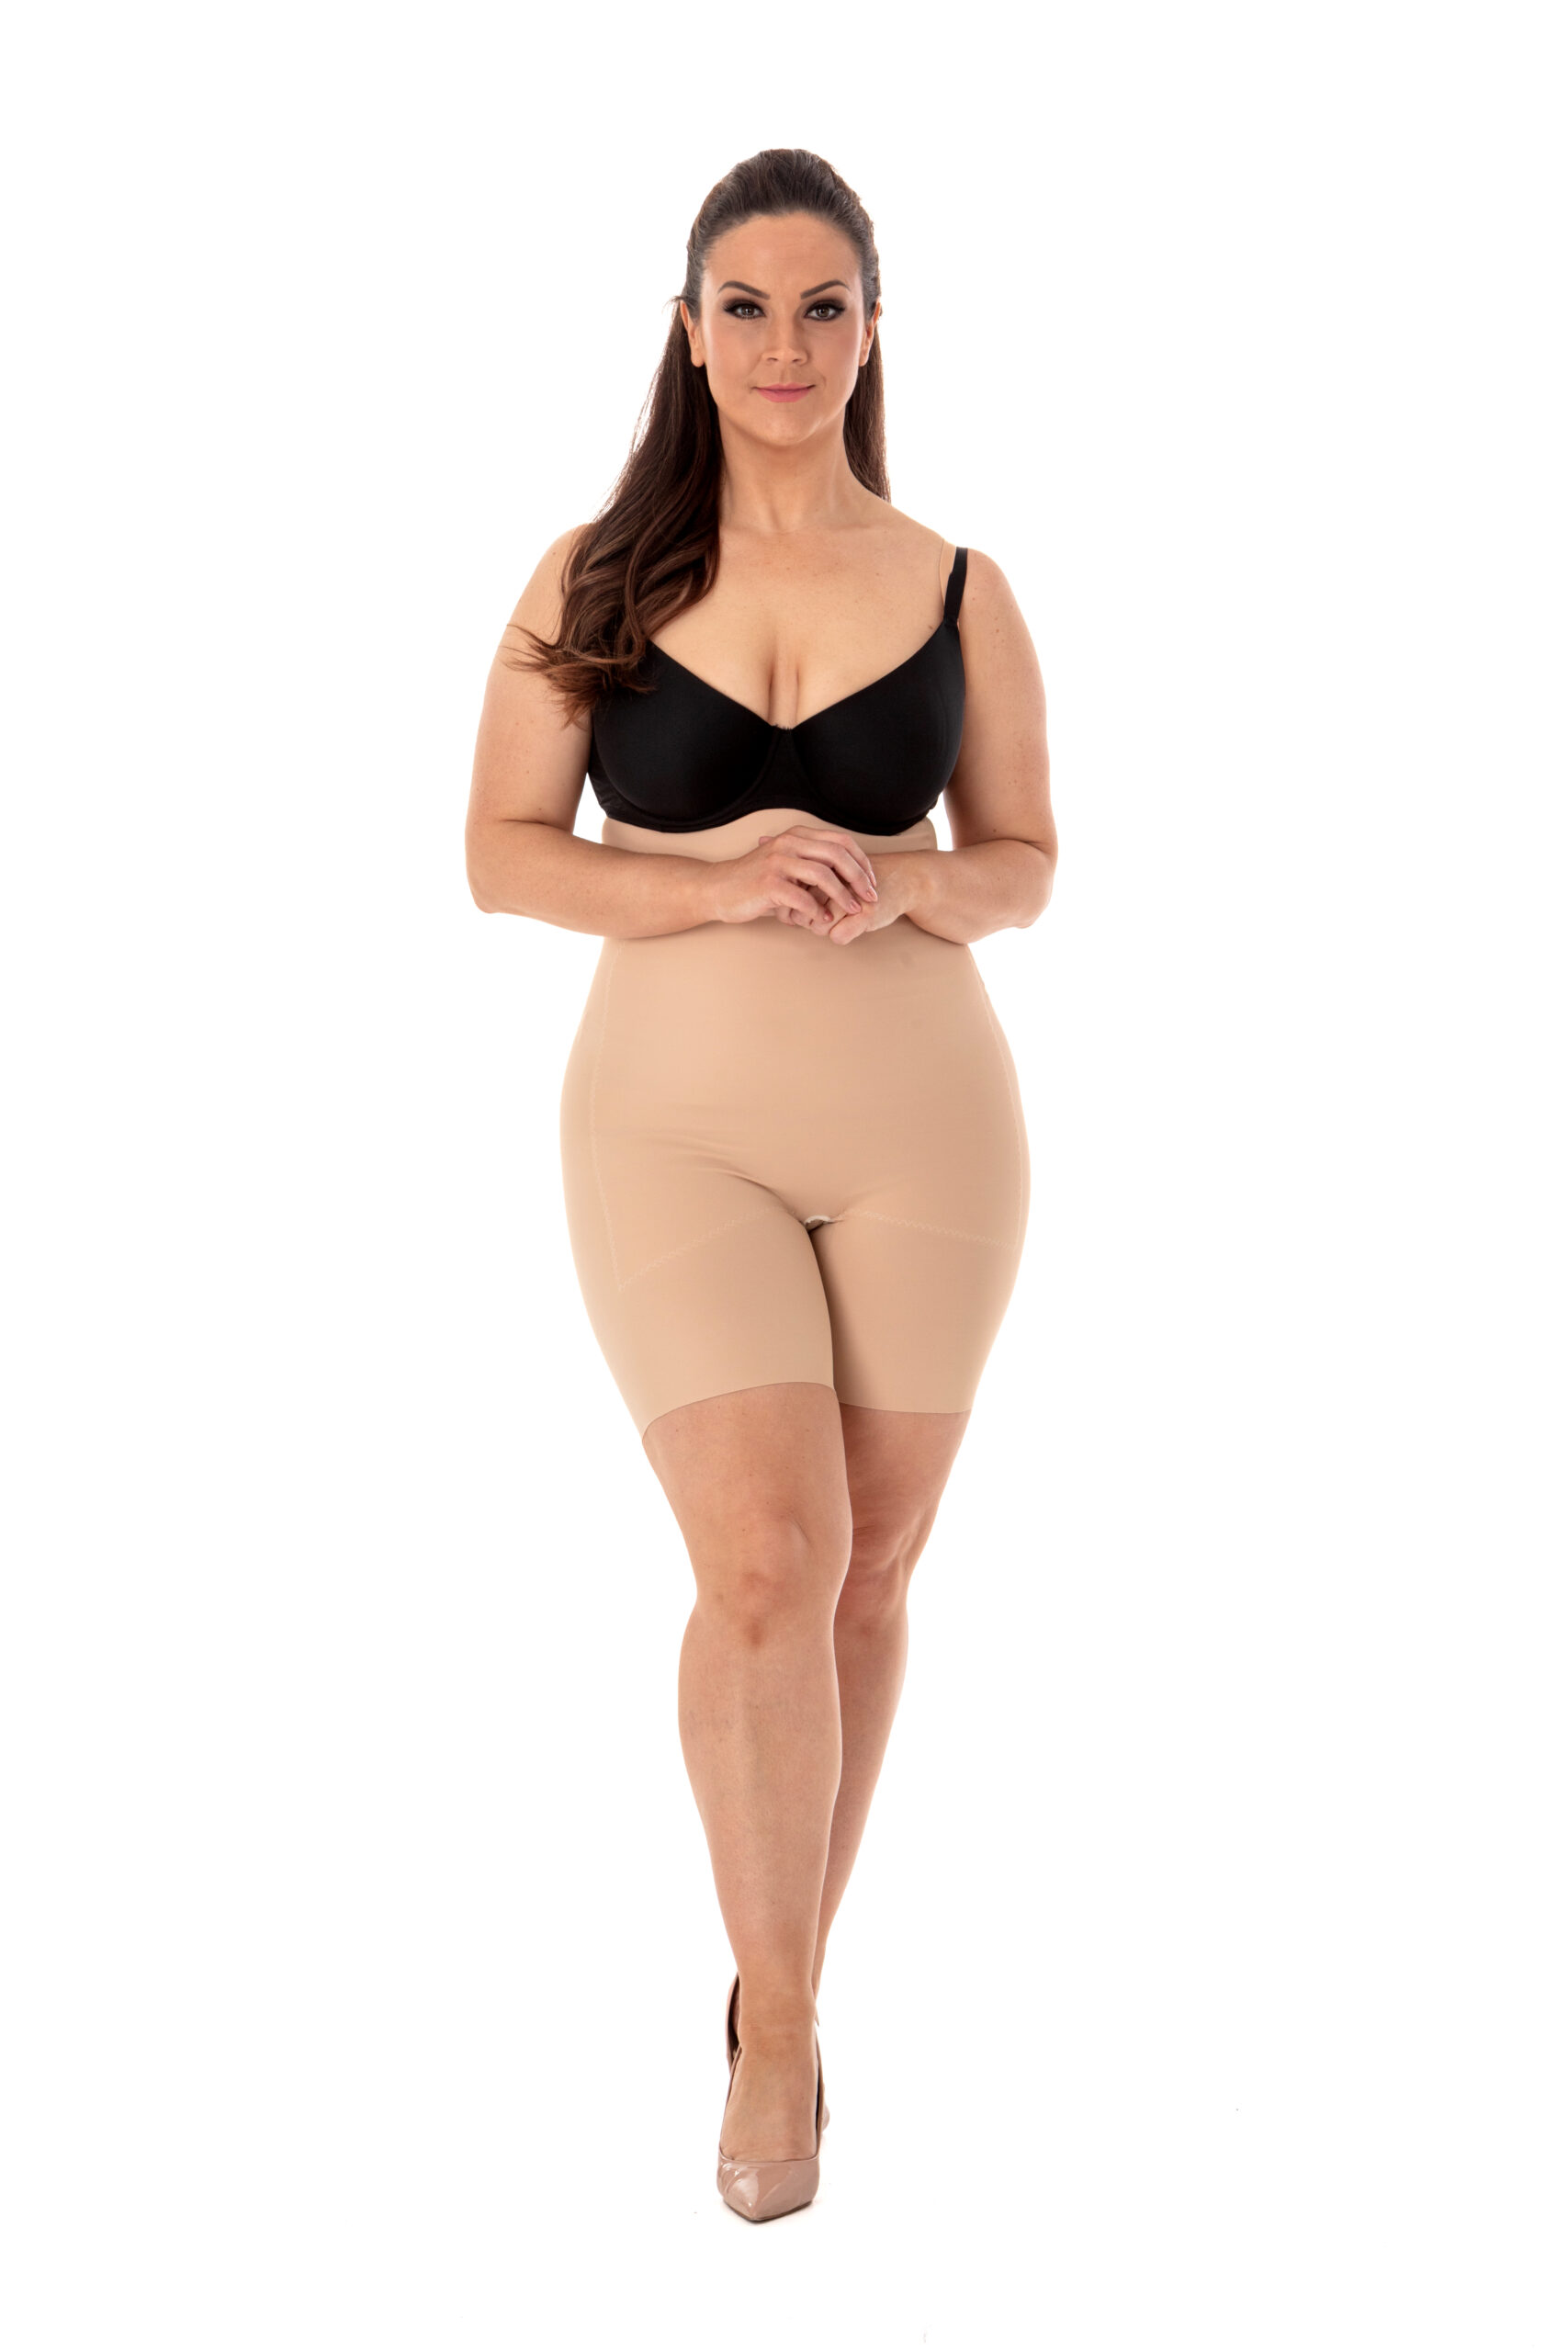 ATIR Shapewear - The ATIR Toner -Before and After and the Toner www.atir.ie